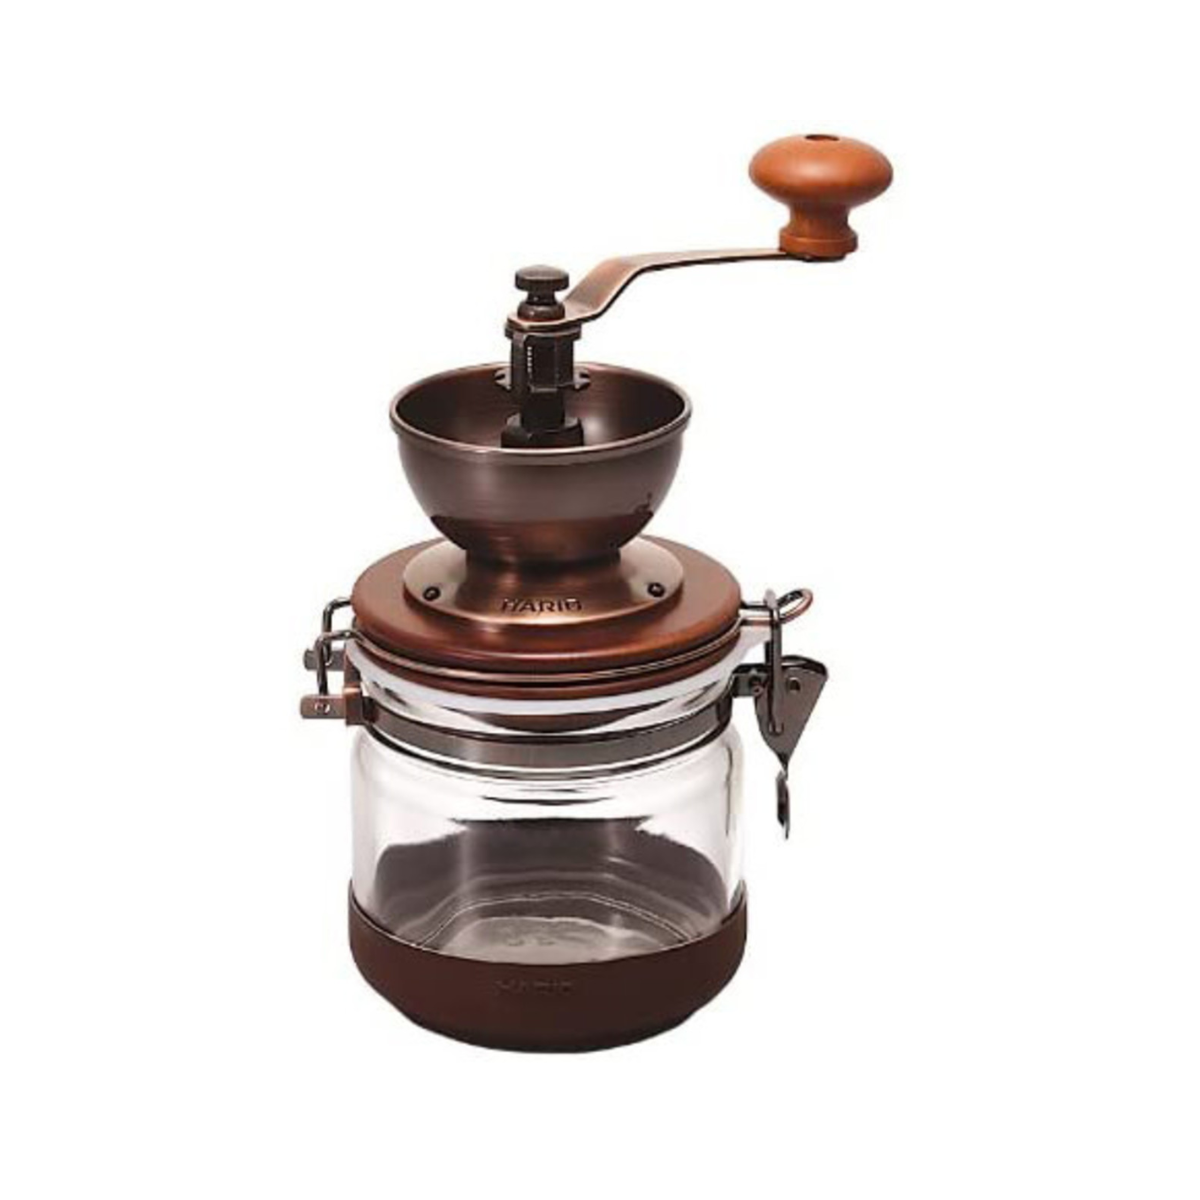 39. Timeless Elegance: Celebrate 8 Years with a Copper Coffee Grinder, the Perfect 8th Anniversary Gift